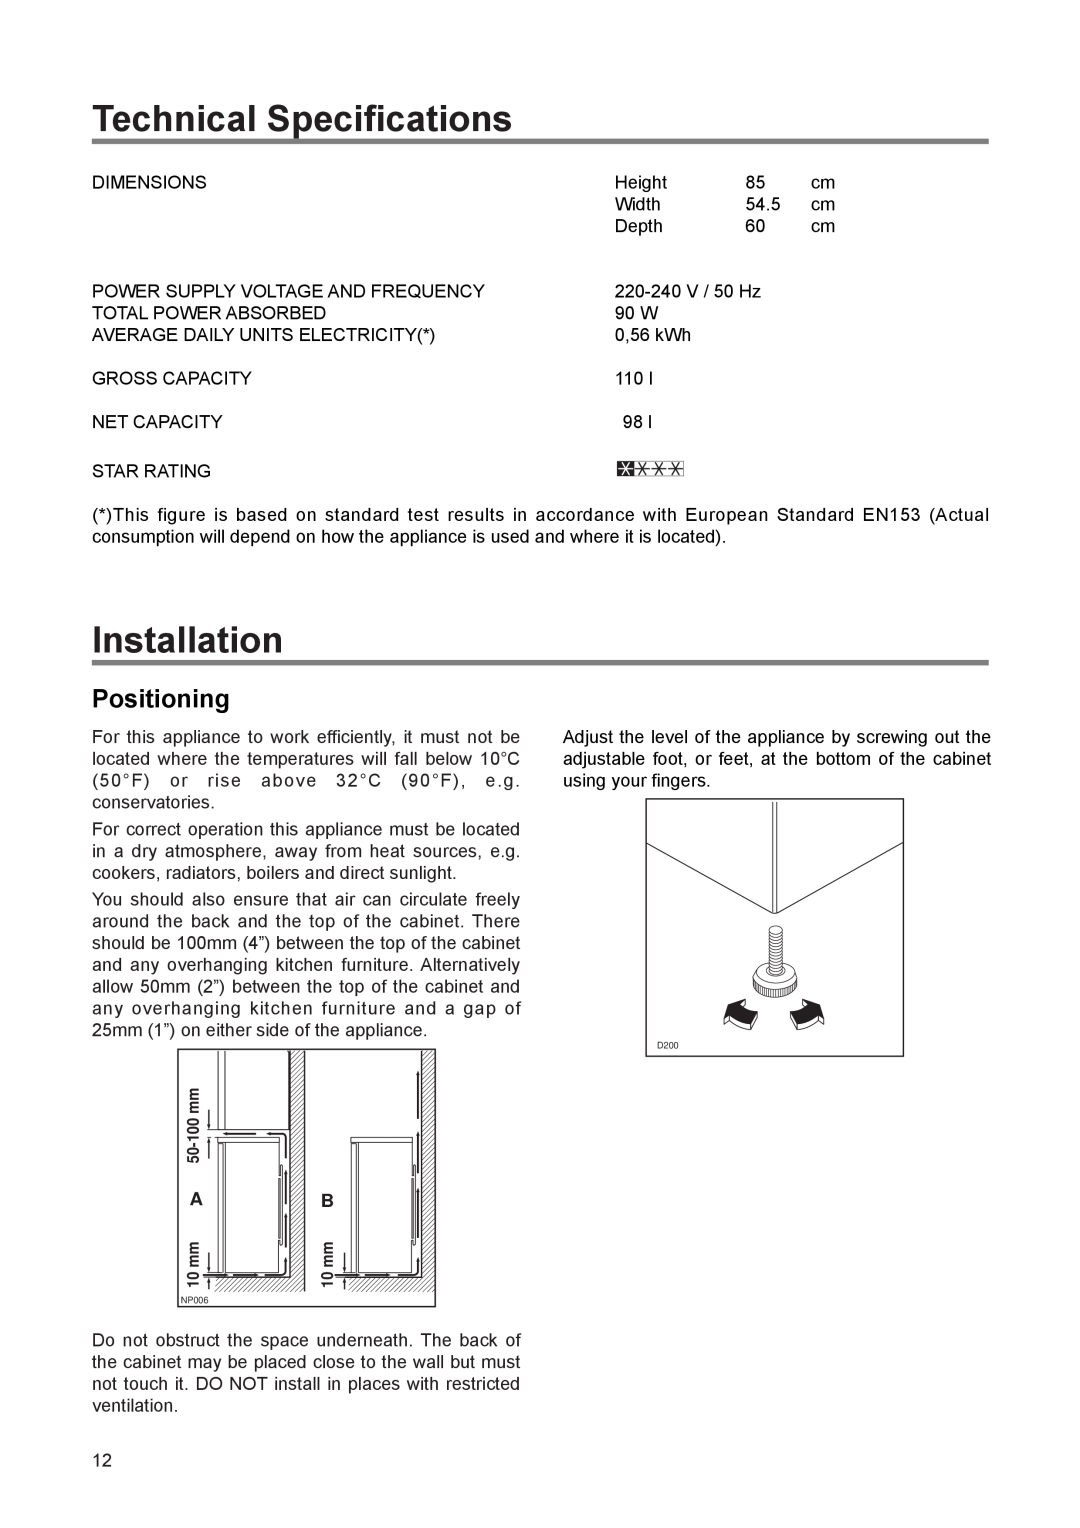 Zanussi ZF 56 SI manual Technical Specifications, Installation, Positioning 